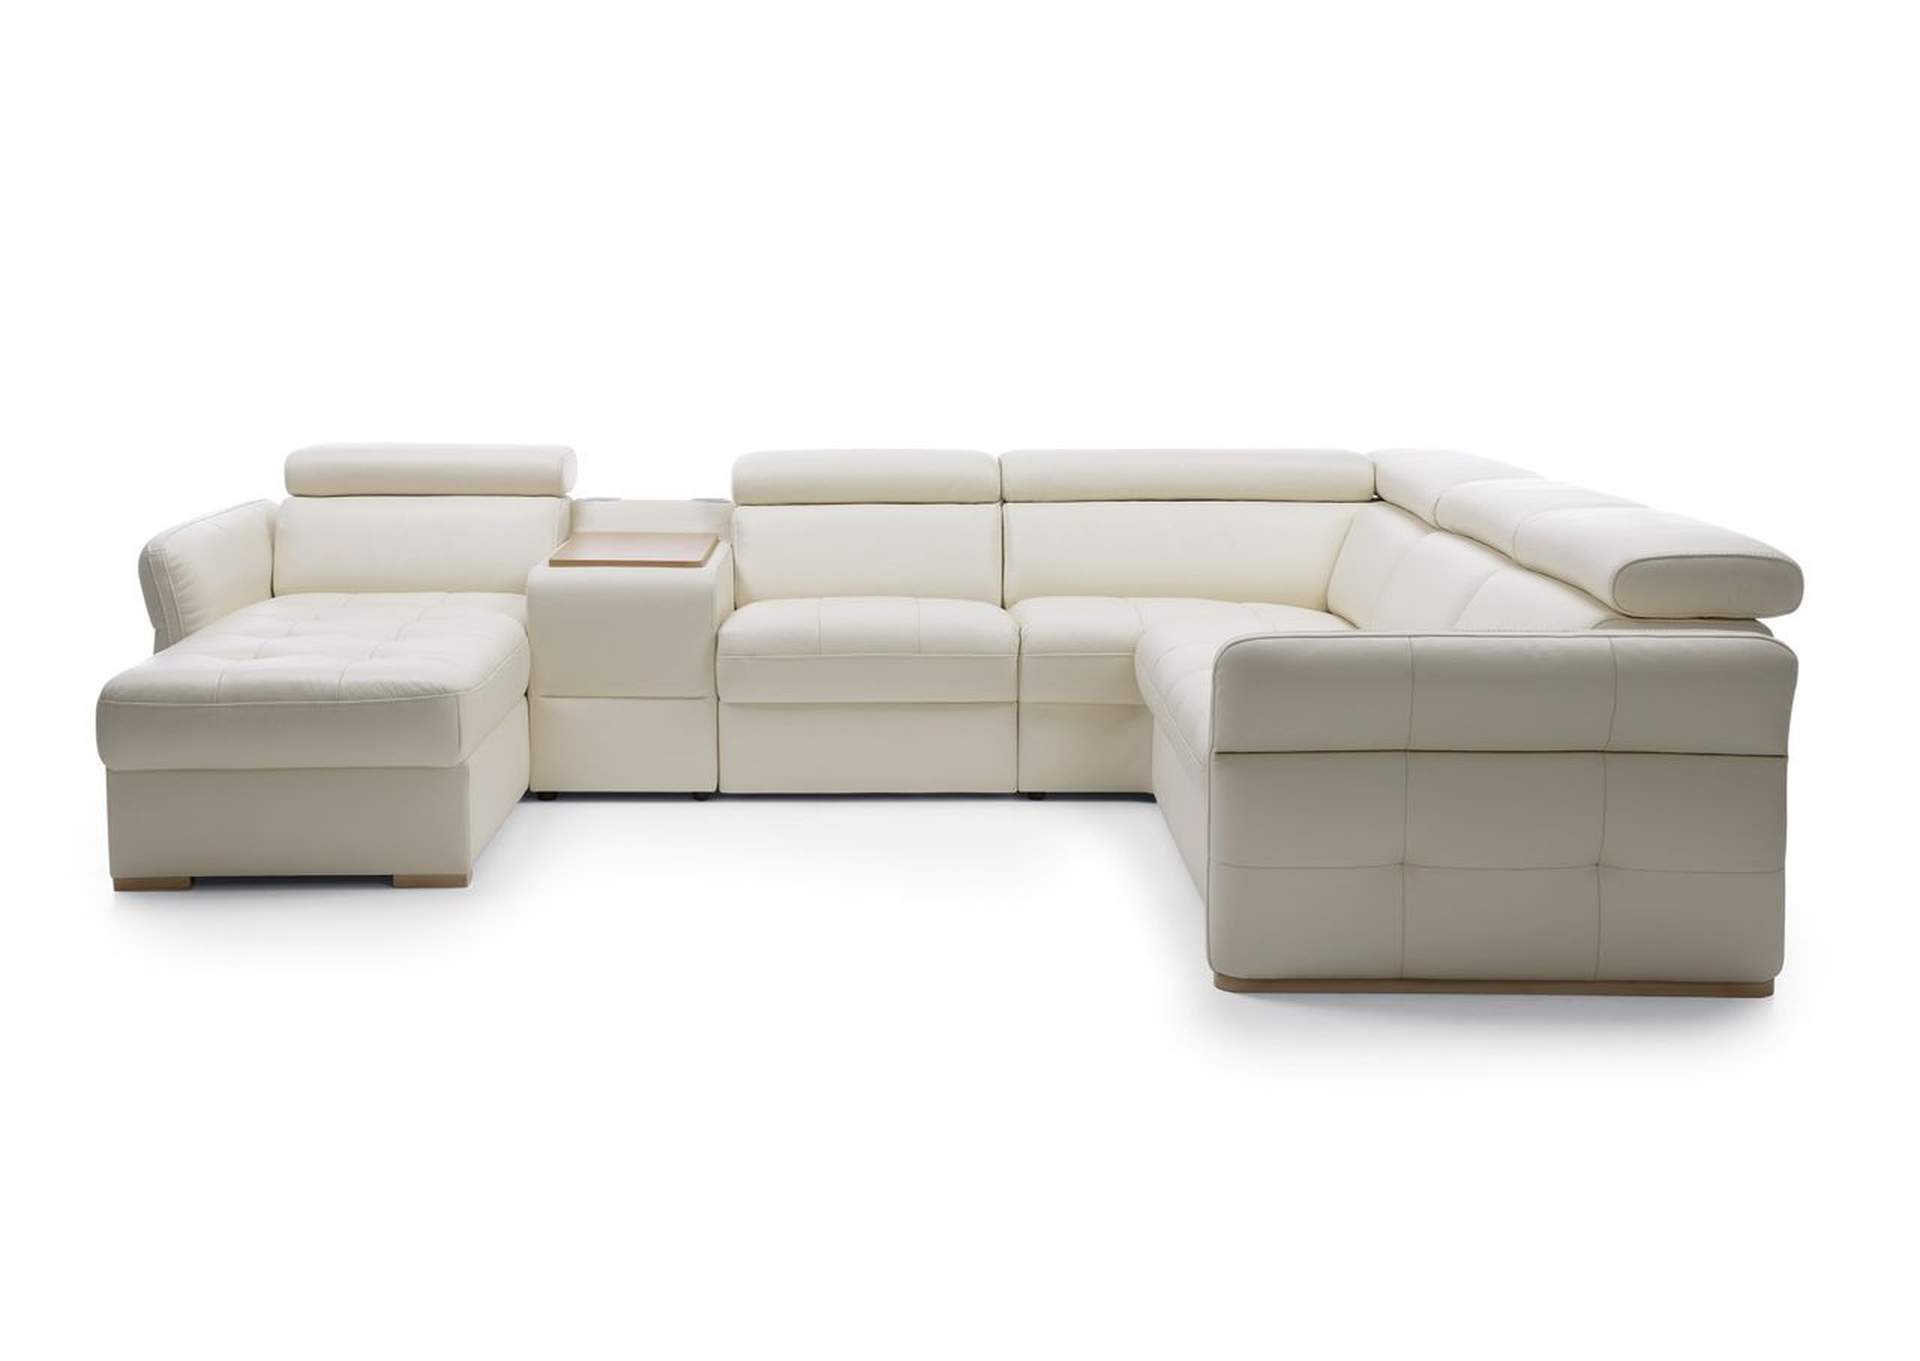 White, Grey/Silver, Light Beige Massimo Sectional,ESF Wholesale Furniture